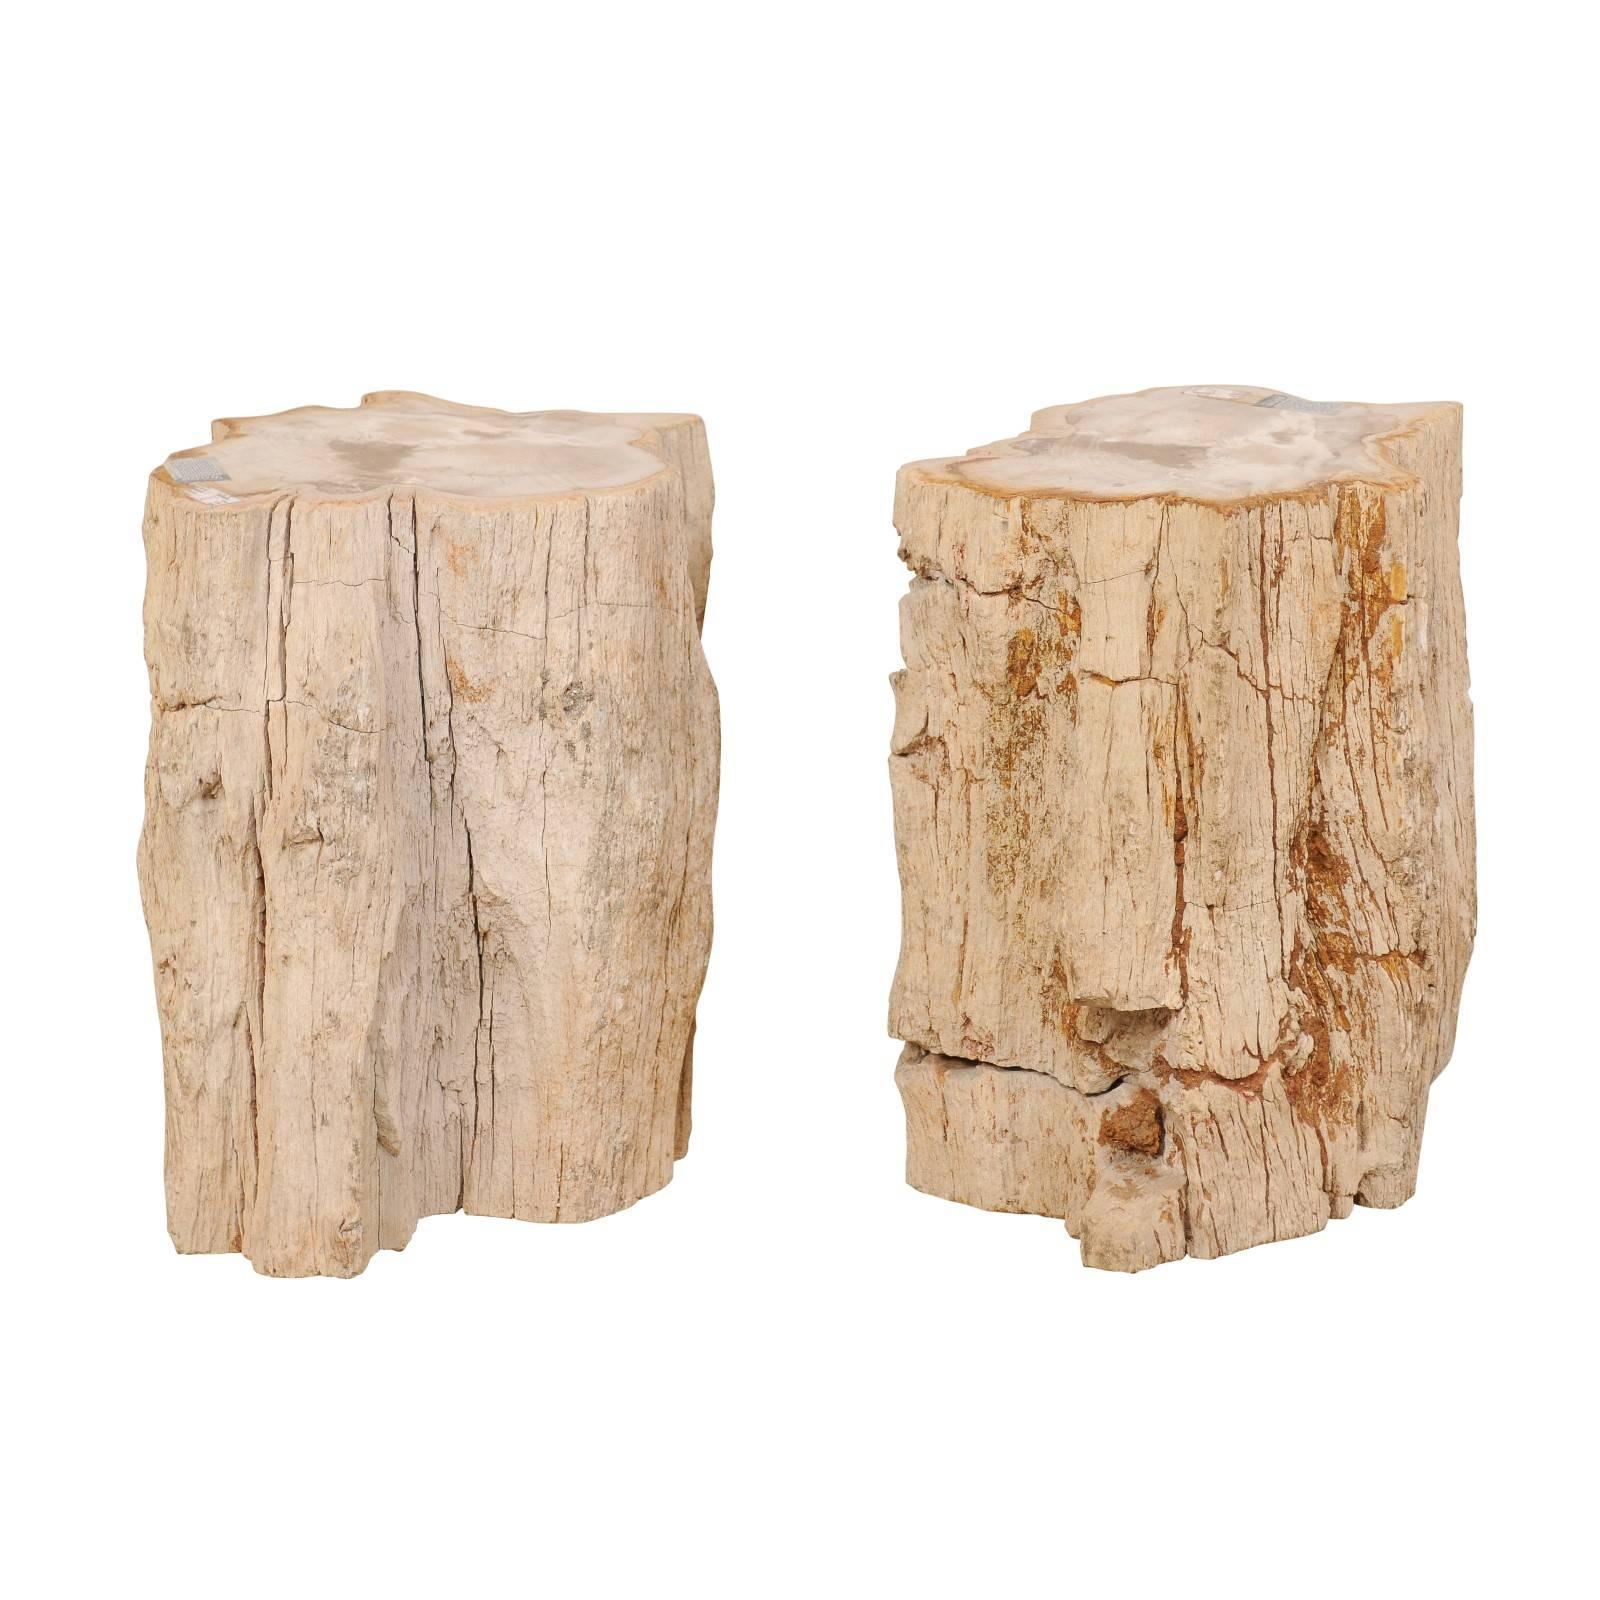 Pair of Live-Edge Petrified Wood Drink Tables With Polished Tops, Light Colored